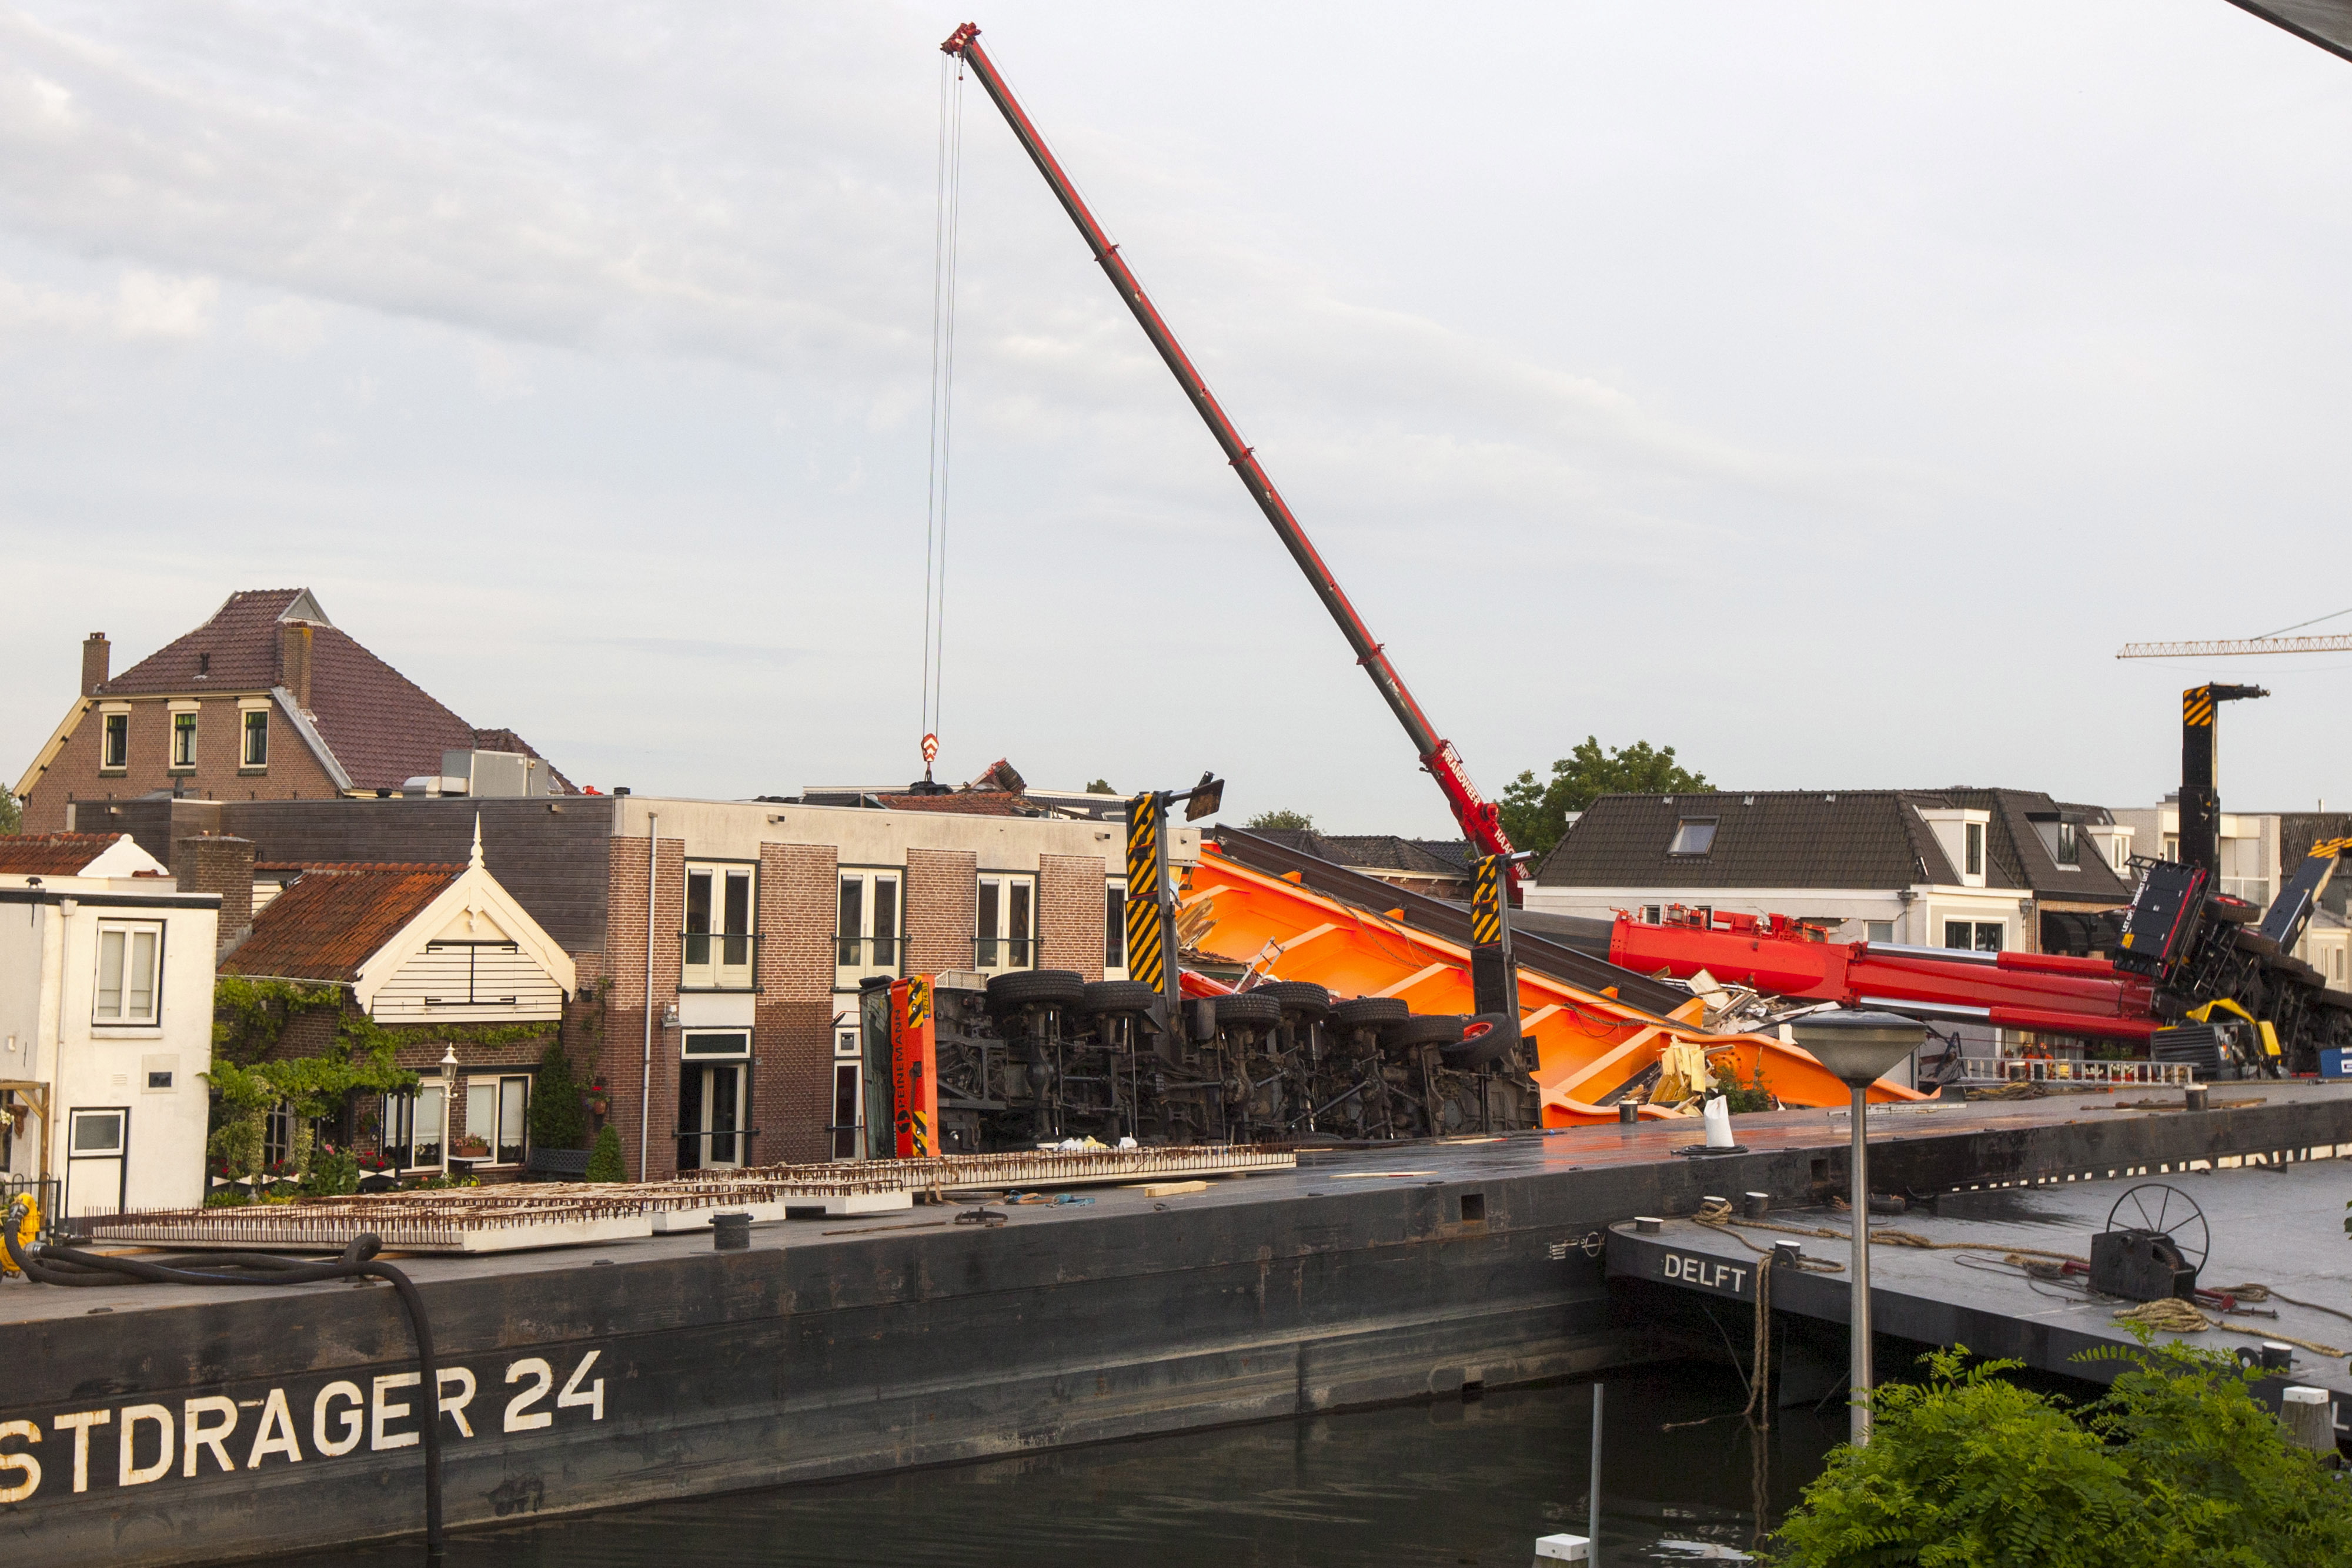 Two collapsed cranes are seen in Alphen aan de Rijn, the Netherlands August 3, 2015. Two cranes hoisting a massive section of bridge collapsed in a western Dutch town on Monday, flattening a row of houses and injuring at least 20 people, authorities said. REUTERS/Ronald Fleurbaaij - RTX1MWEU (Ronald Fleurbaaij&mdash;Reuters)